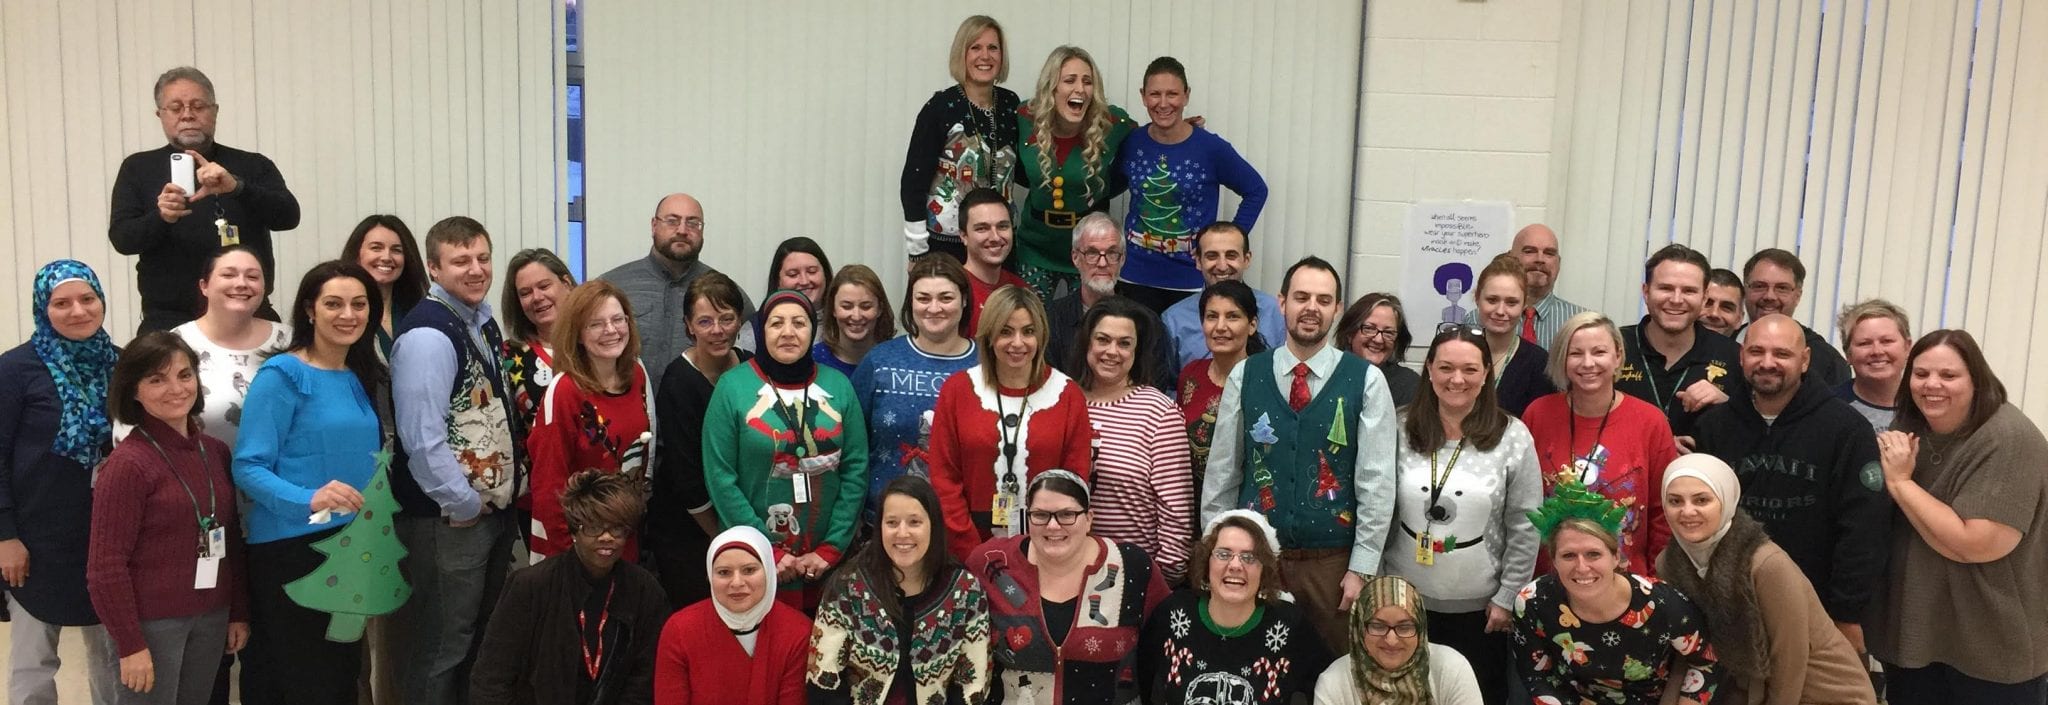 Annual Ugly Sweater Day: Wednesday Dec. 20, 2017